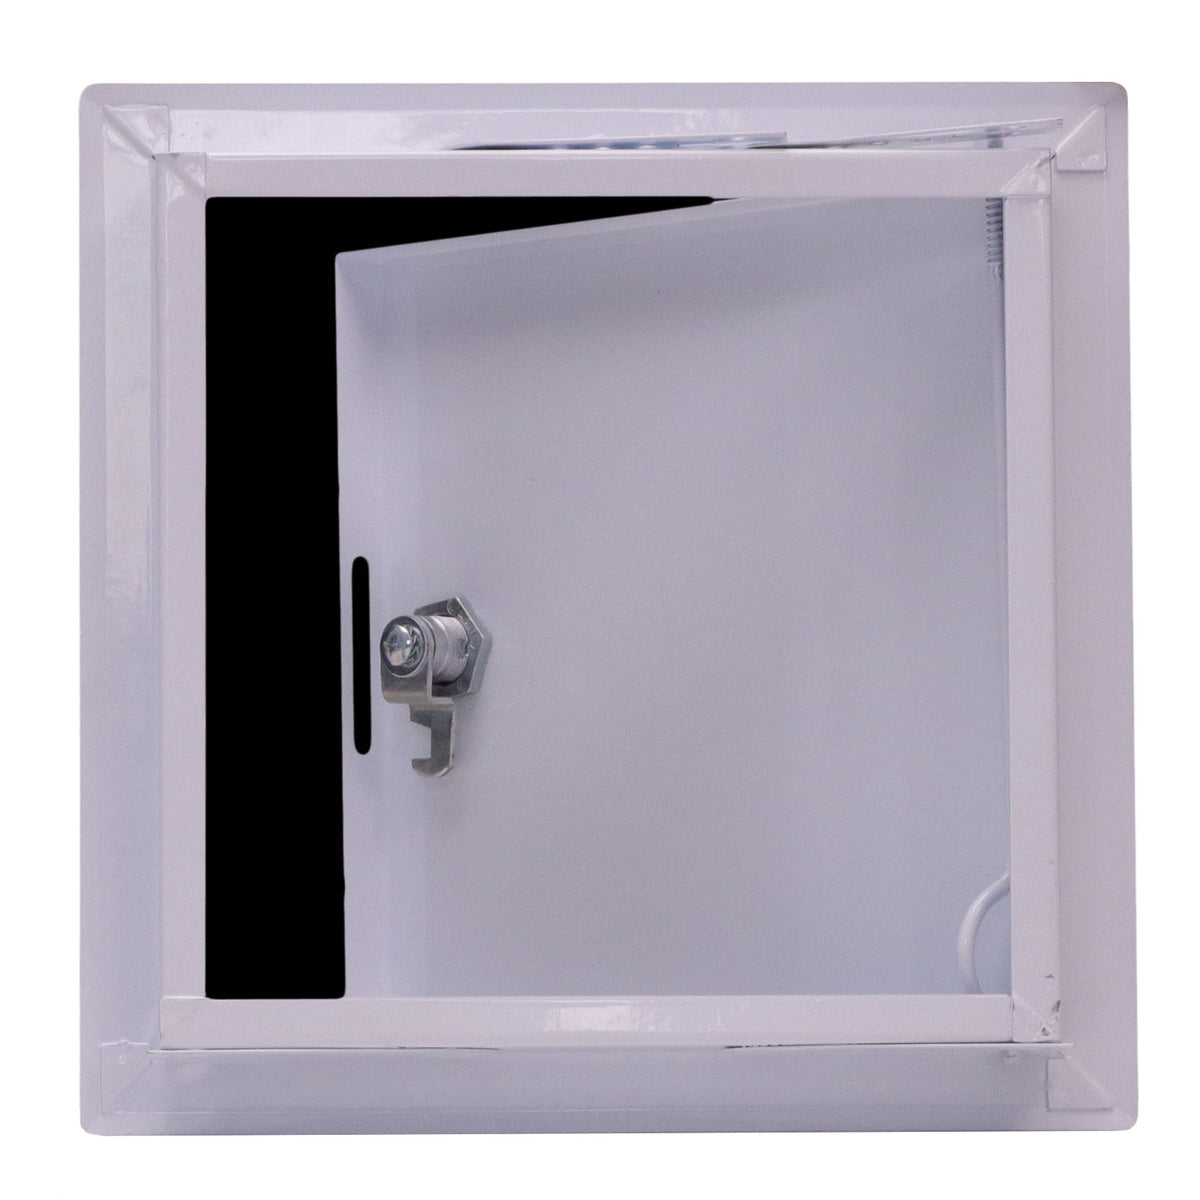 12&quot; X 12&quot; Steel Access Panel Removable Door For Wall / Ceiling Application (Lock and Key) With Frame - [Outer Dimensions: 13&quot; Width X 13&quot; Height]